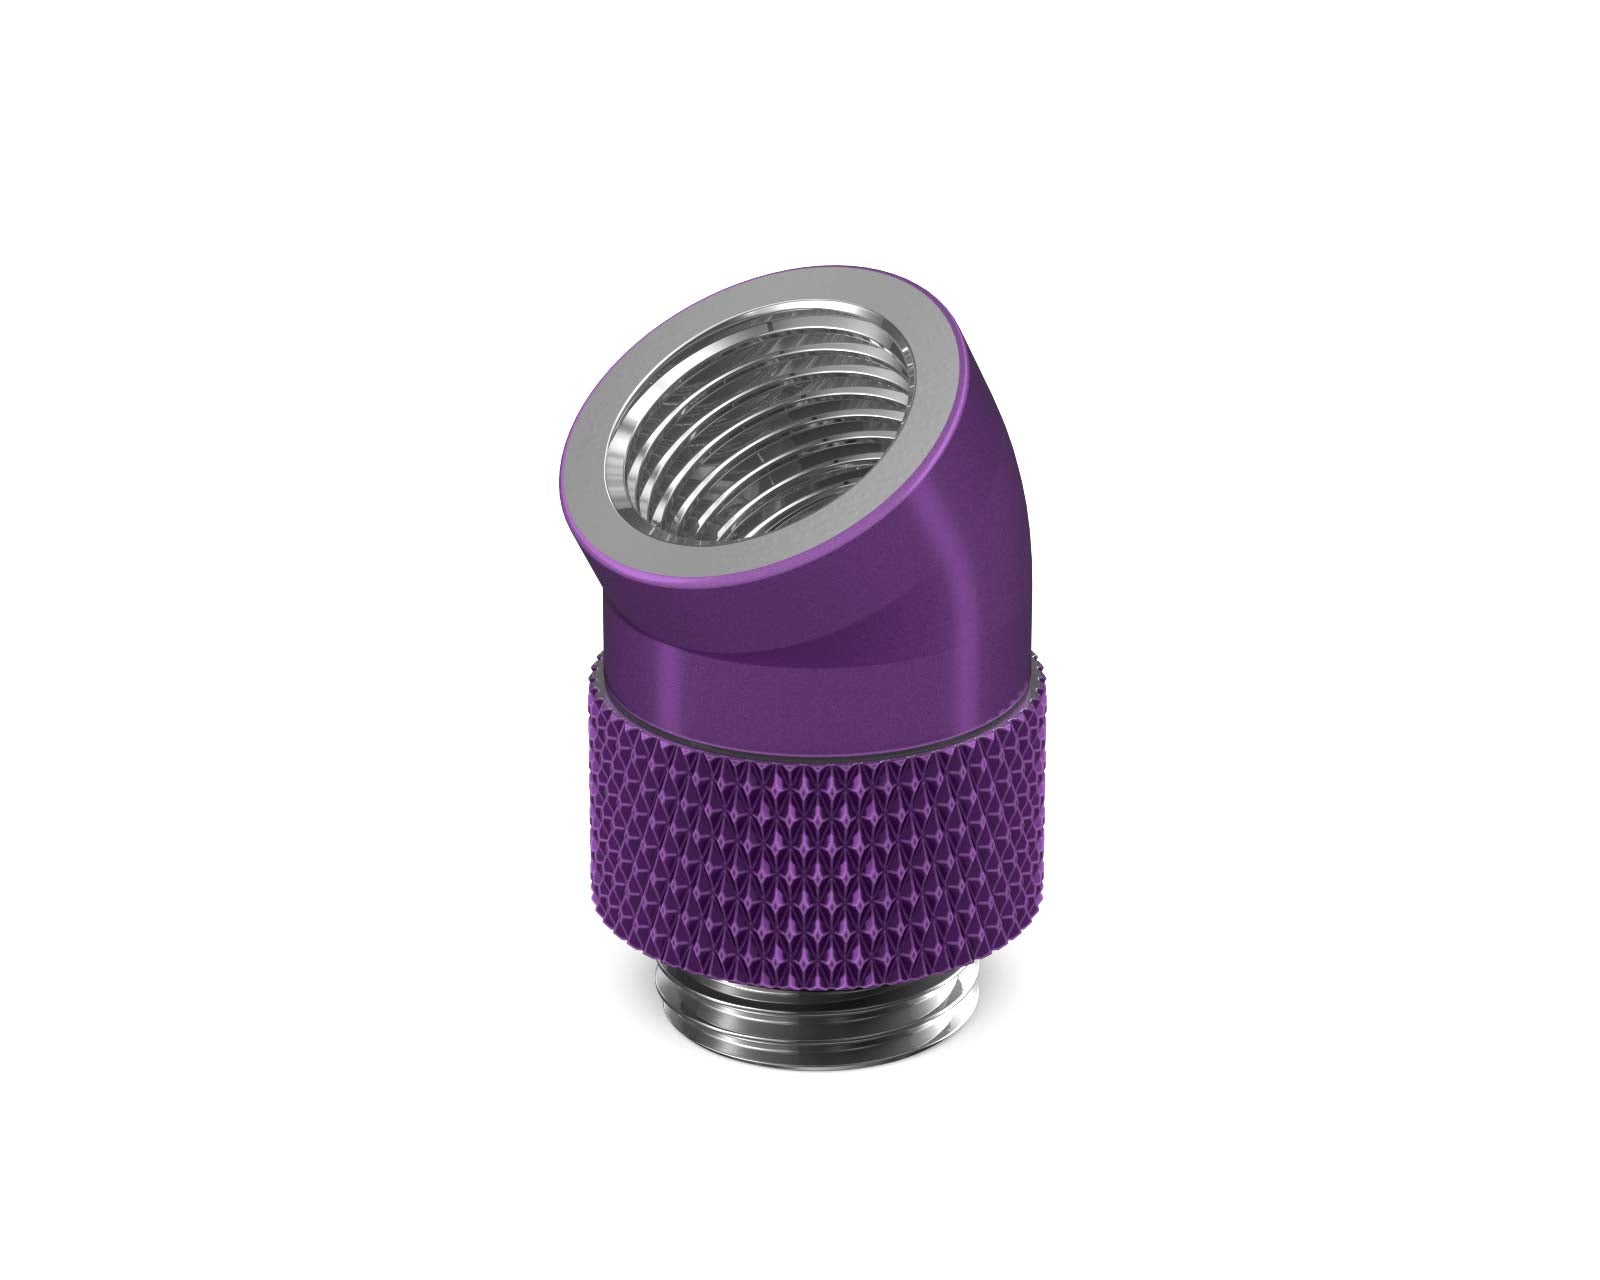 PrimoChill Male to Female G 1/4in. 30 Degree SX Rotary Elbow Fitting - PrimoChill - KEEPING IT COOL Candy Purple